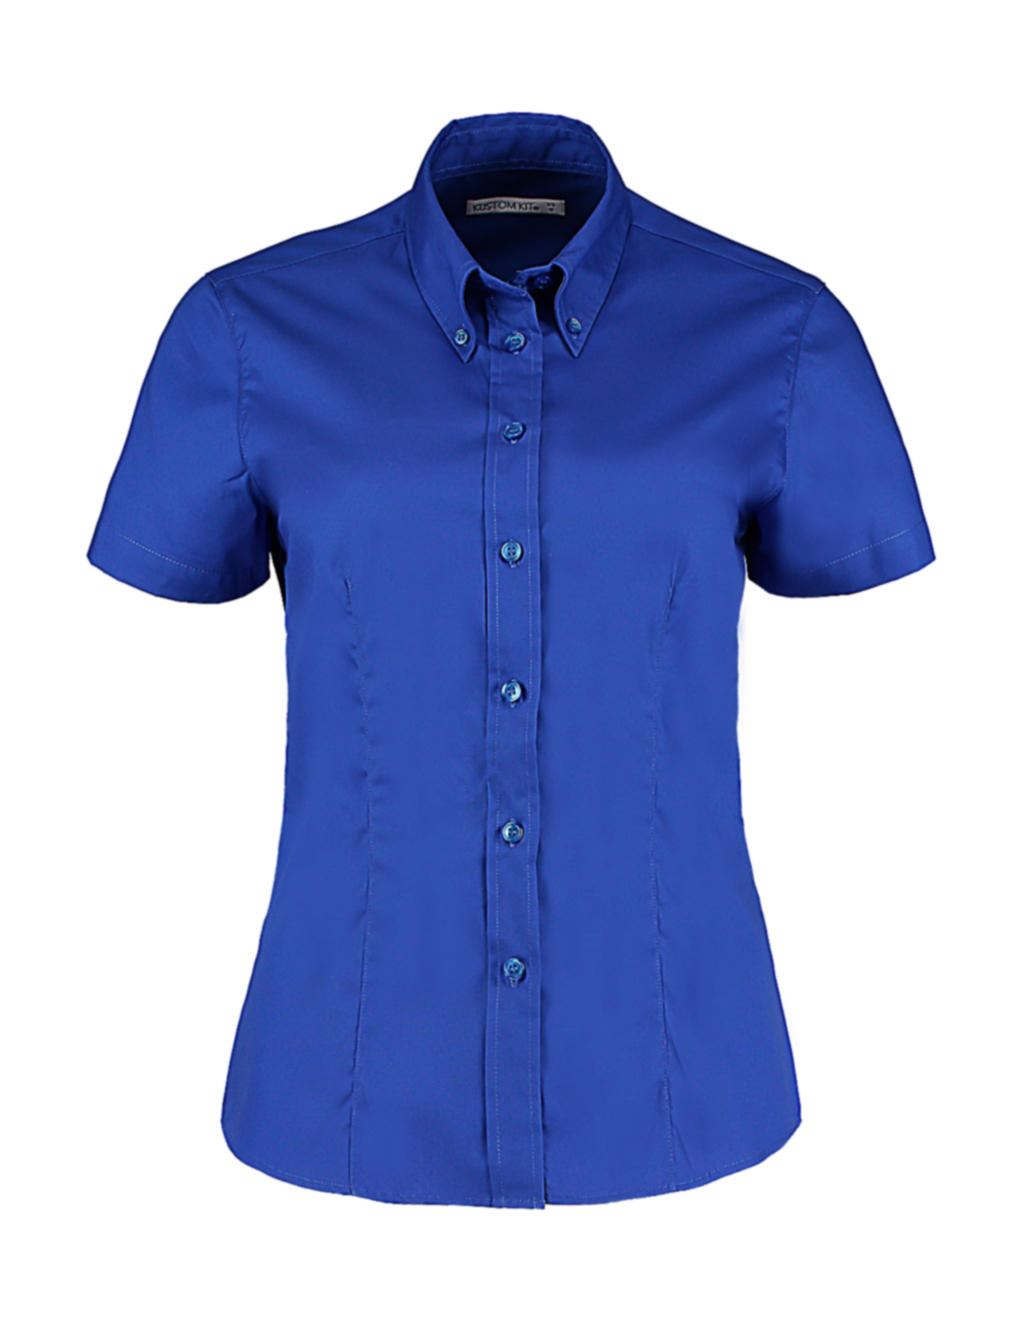  Womens Tailored Fit Premium Oxford Shirt SSL in Farbe Royal